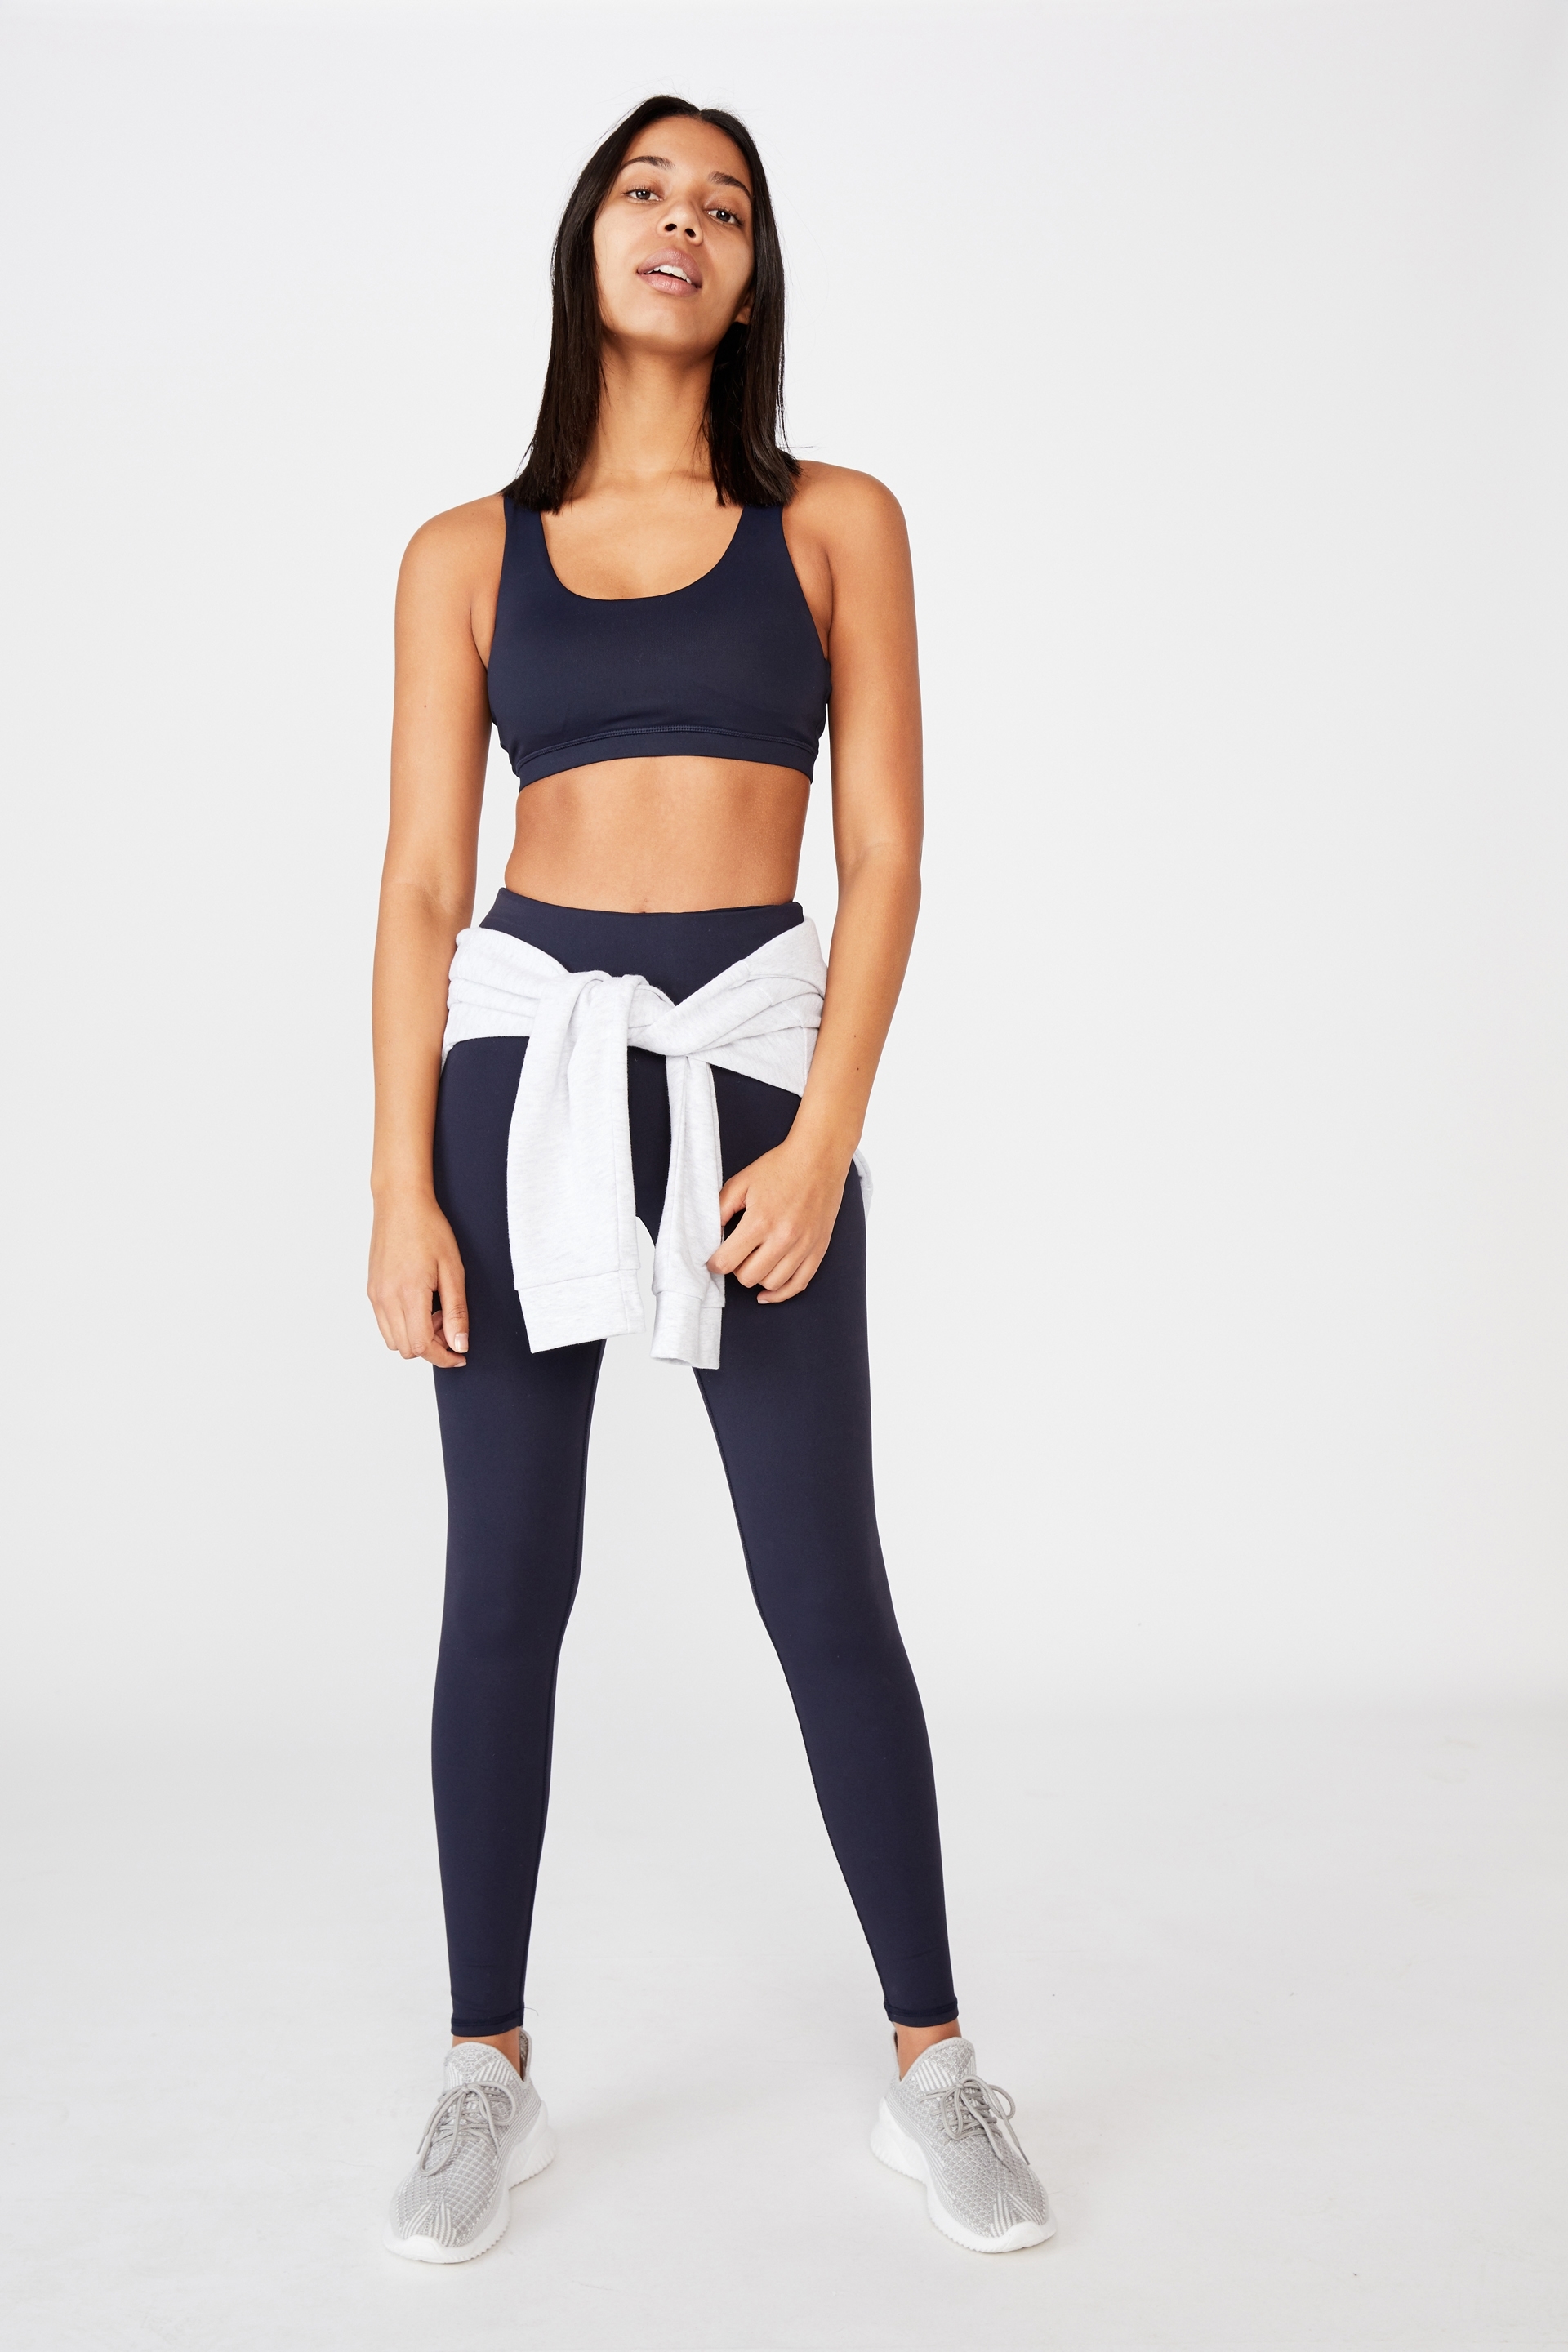 Our favourite workout buddy, the Active Core Tight has become one of our best-selling active tights. No frills - simply a full length, wide stretch, double layered waistband and moisture wicking fabric for maximum comfort when you workout. - Firmly hugs the body - High waist - Full length - Double layer wide stretch fabric waistband - Waistband coin pocket - Moisture wicking fabric - Flatlocked stitching SOLID: 88% POLYAMIDE / 12% ELASTANE MARLE: 44% POLYAMIDE / 44% POLYESTER / 12% ELASTANE MODEL WEARS SIZE: SMALL - AU 10 US 6 EUR 38